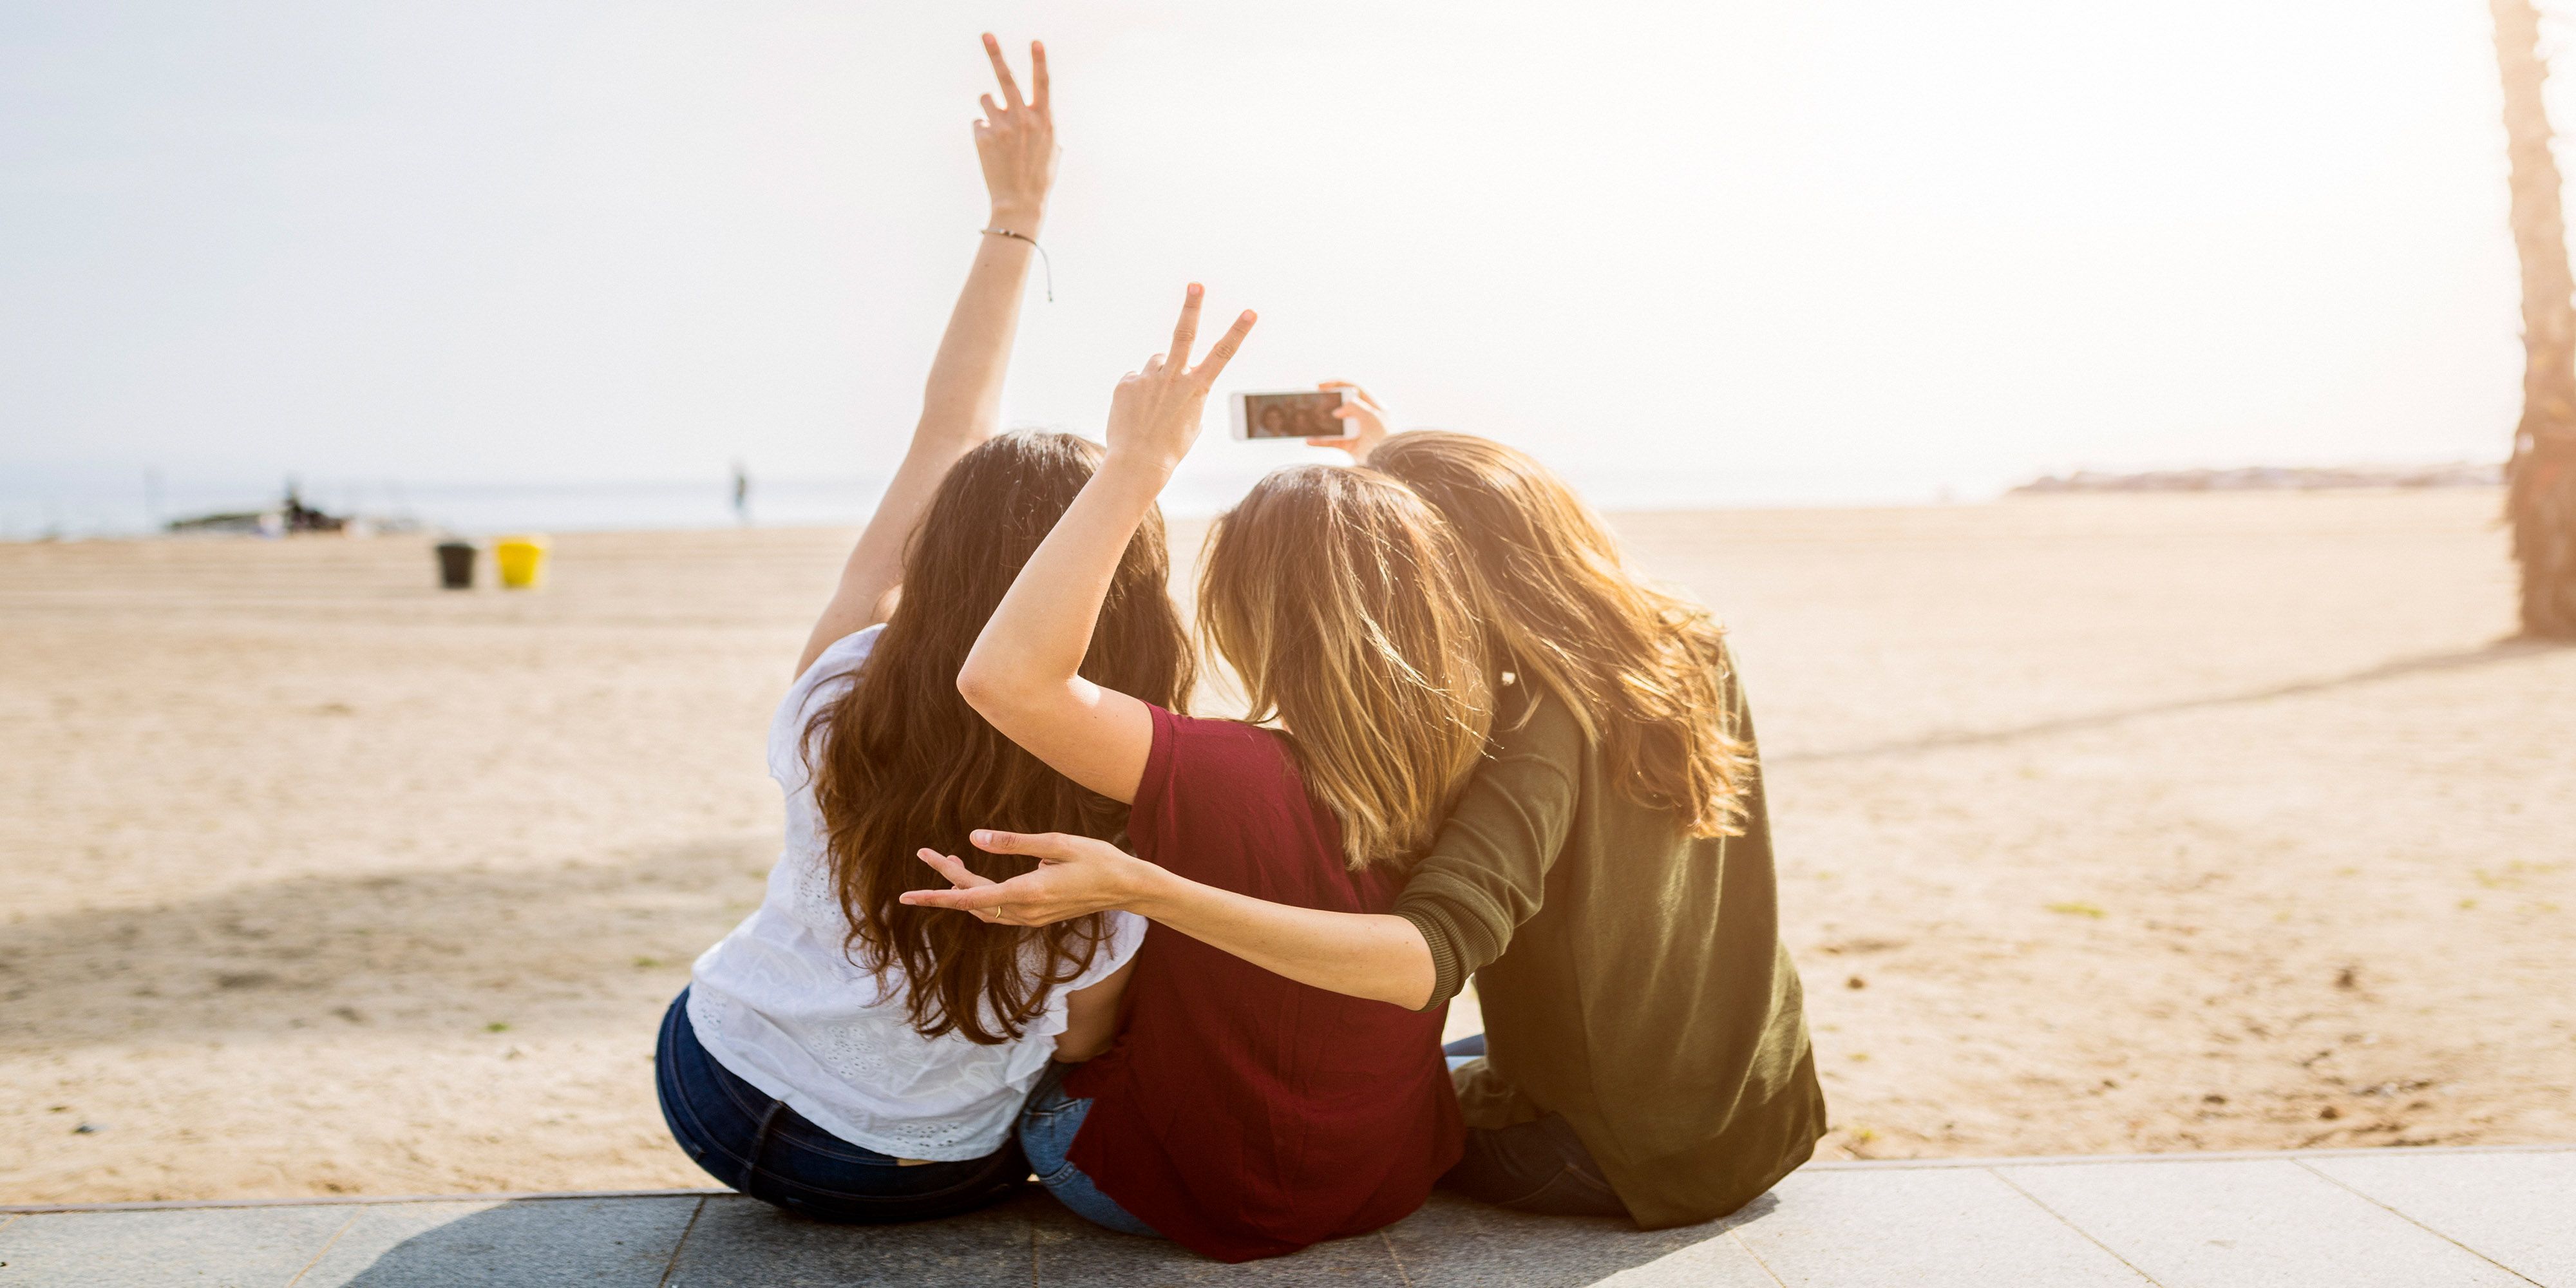 5 Best Apps For Making New Friends